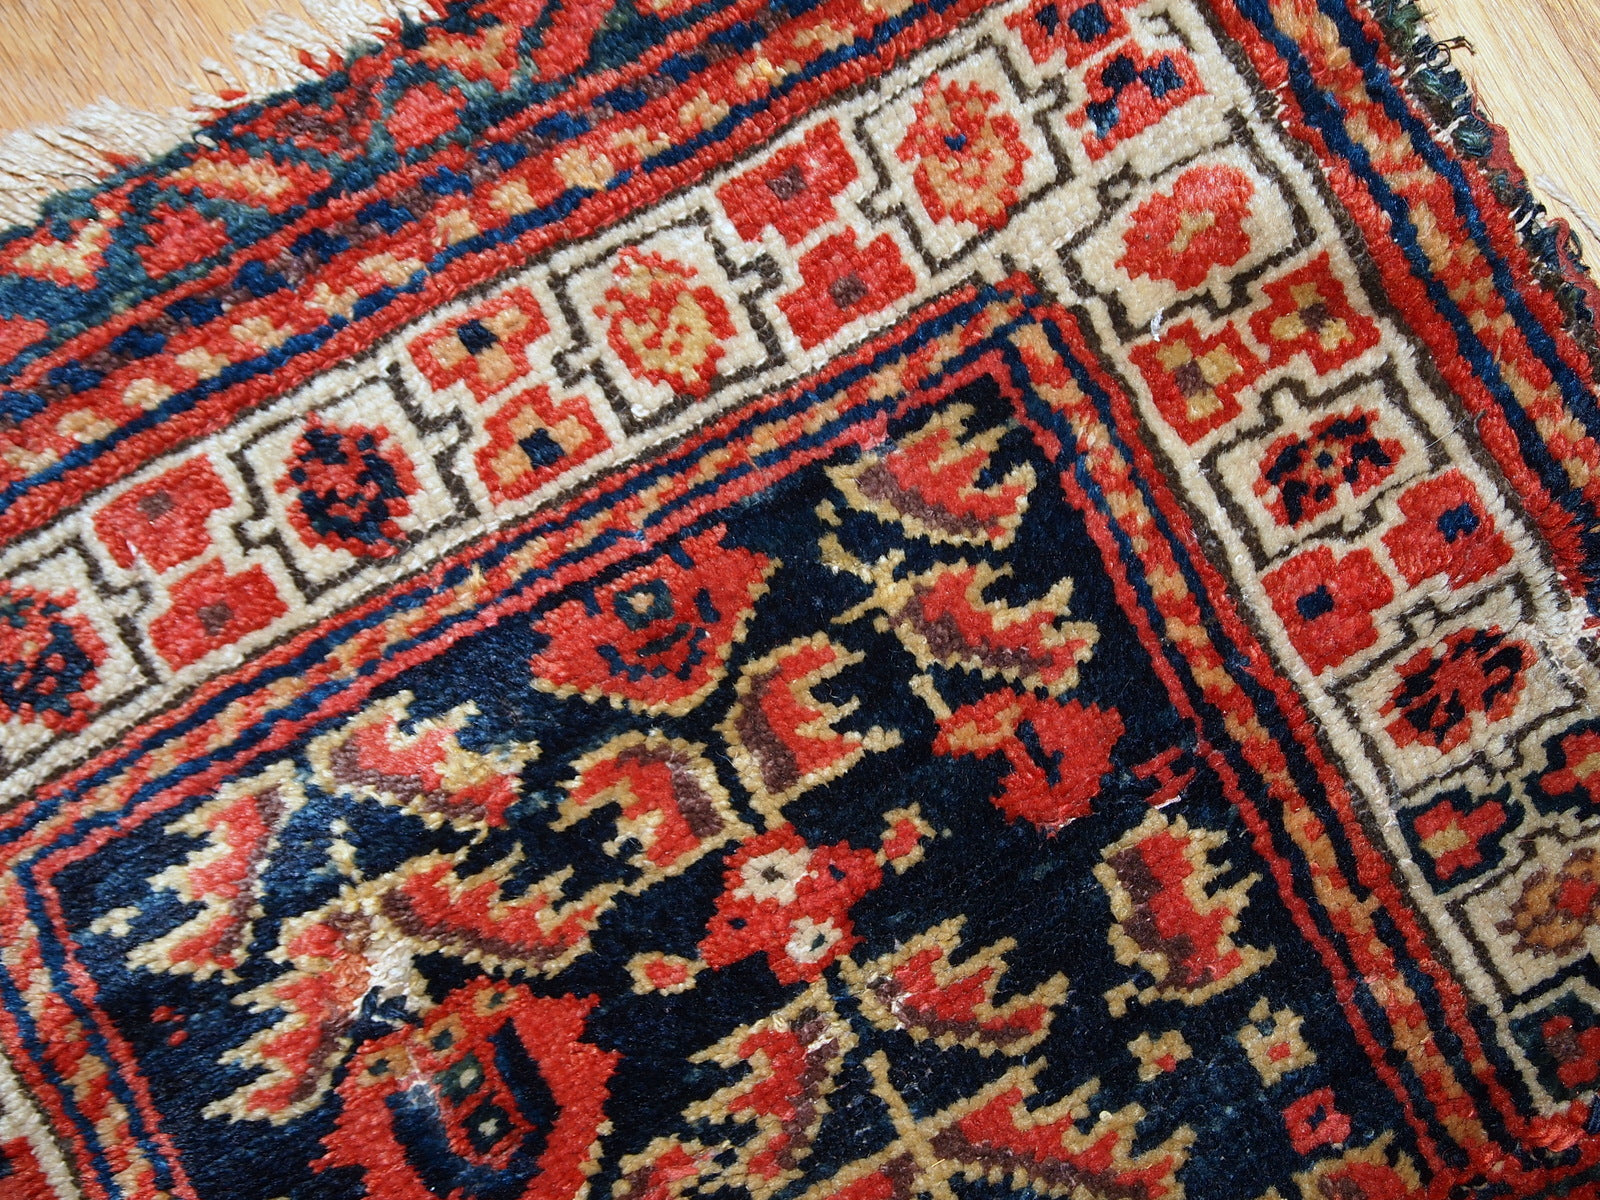 Hand made antique Malayer bag face in original condition with some age wear. The rug made has traditional tribal design in navy blue, white and red shades. 